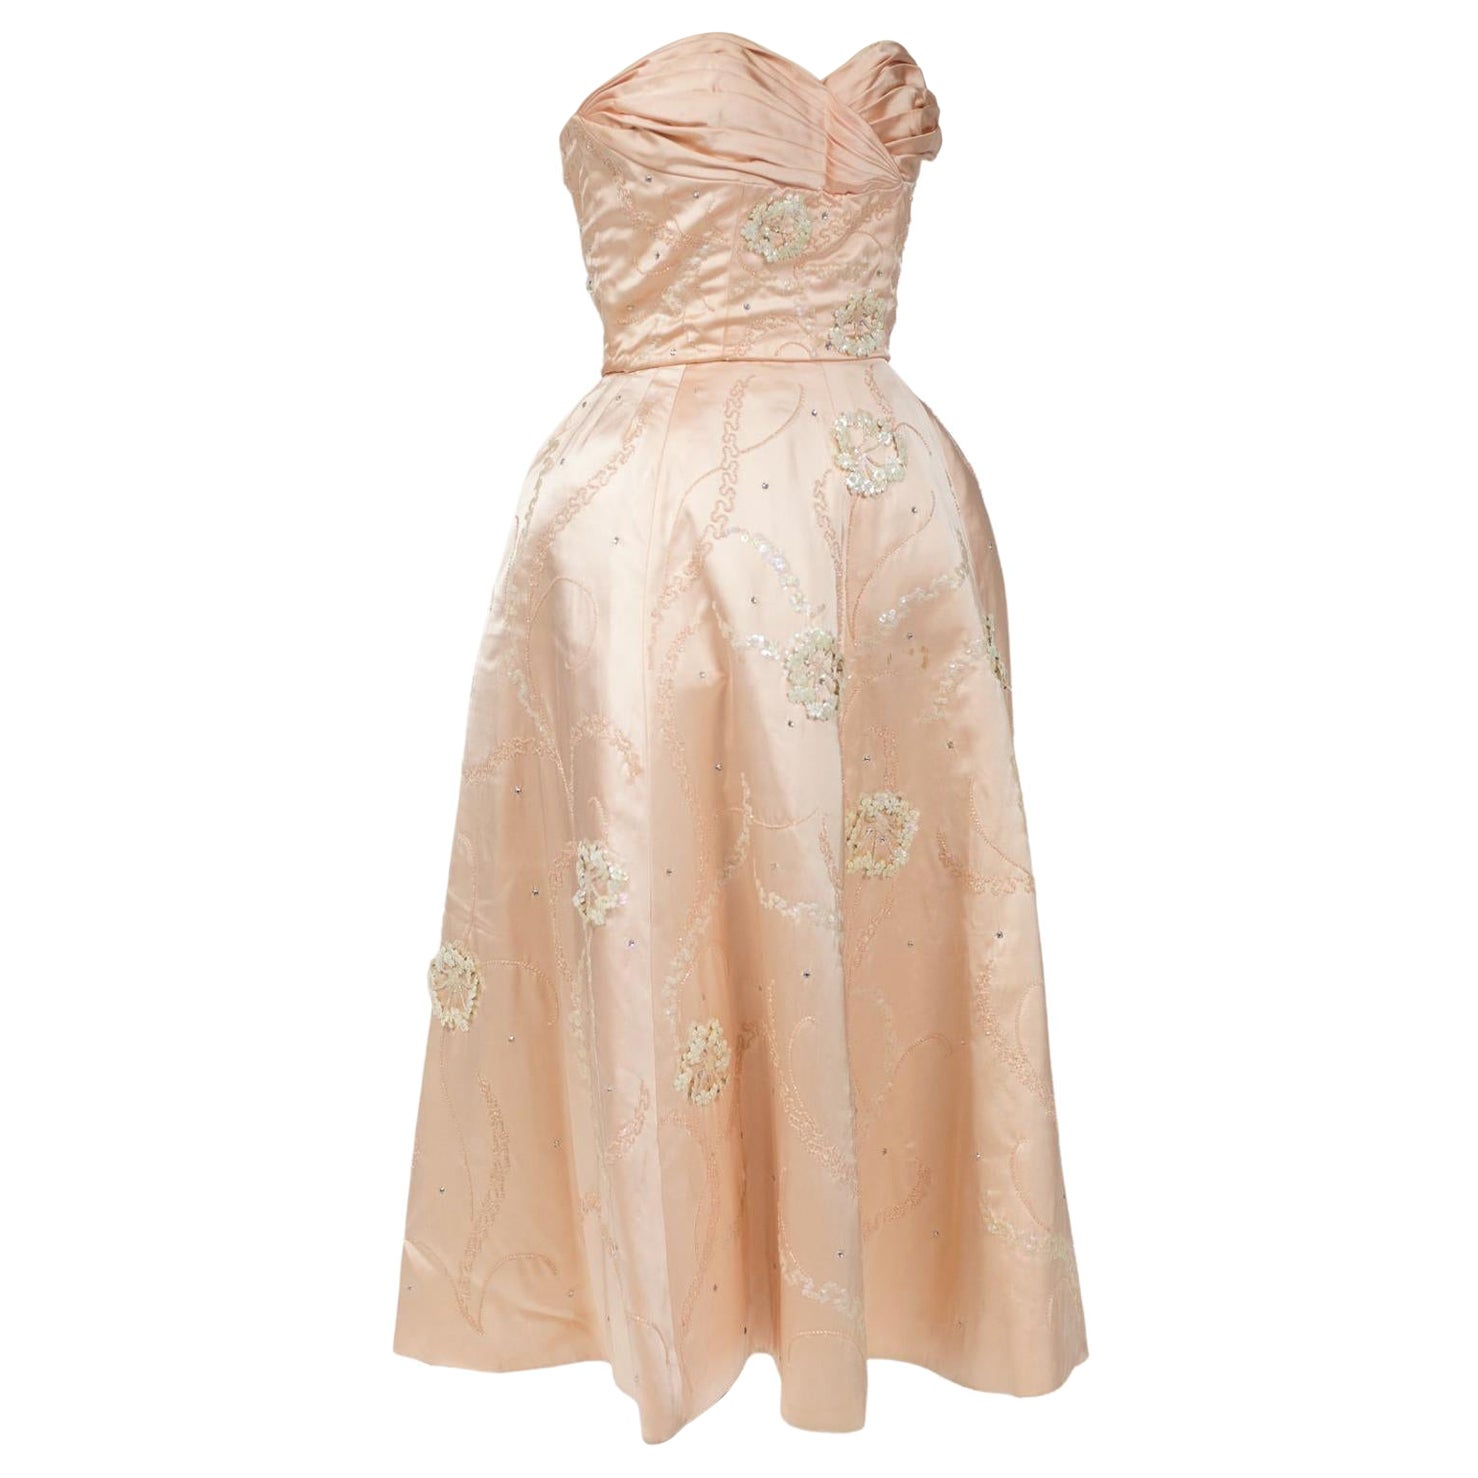 A Satin Embroidered Ball Gown by Harvey Berin Designed by Karen Stark Circa 1955 For Sale